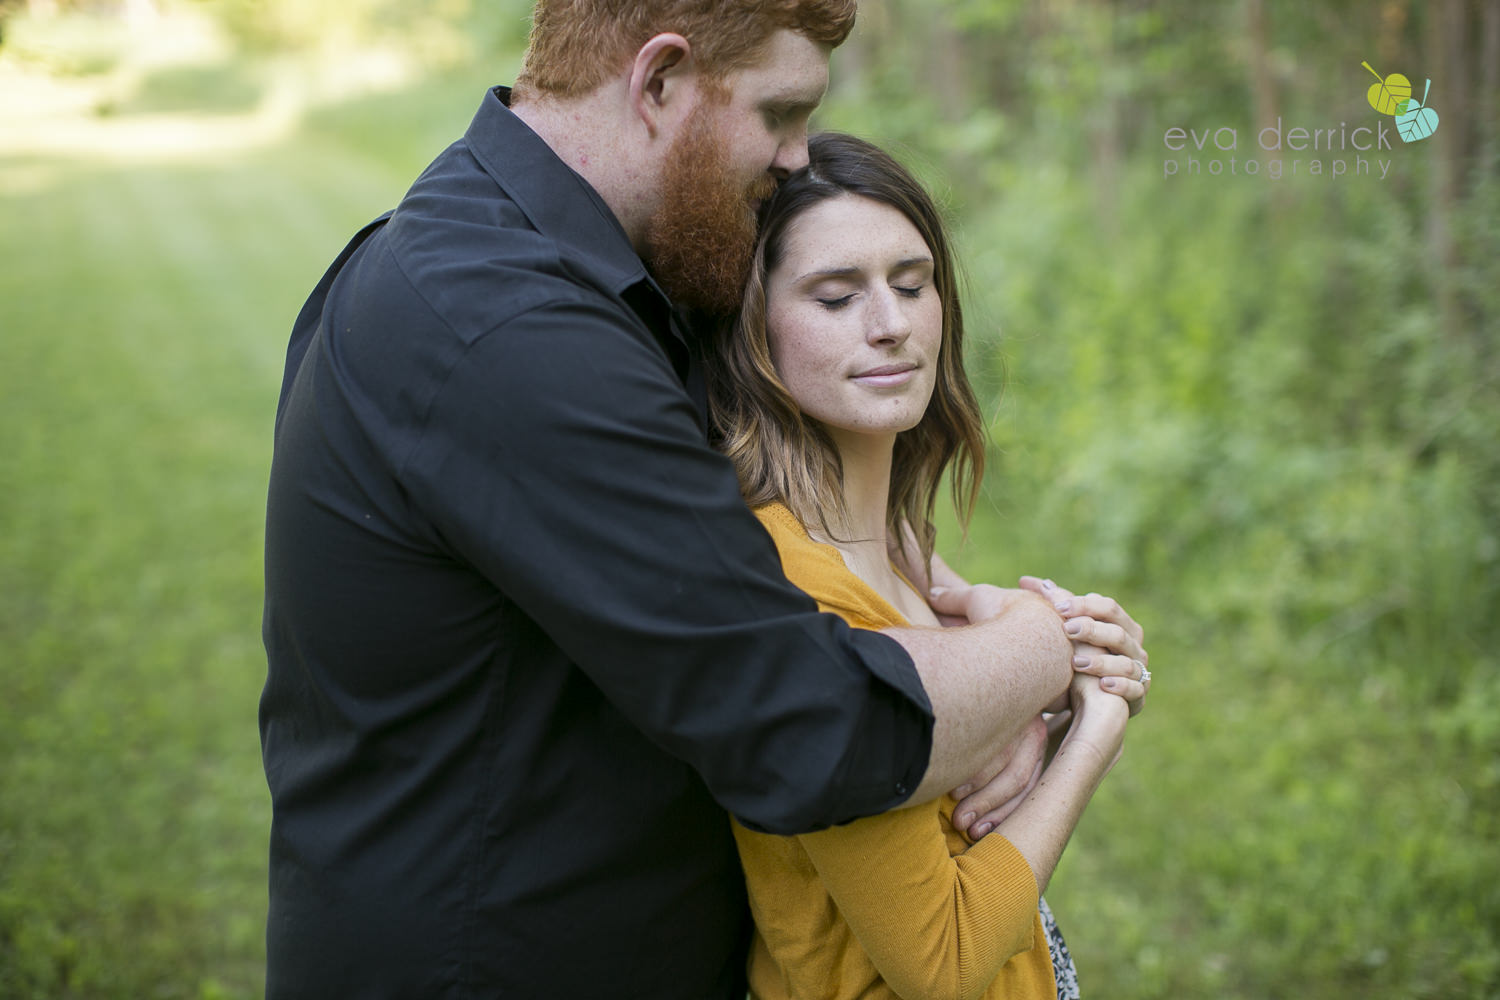 Millgrove-Photographer-Millgrove-Engagement-Session-photography-by-Eva-Derrick-Photography-003.JPG